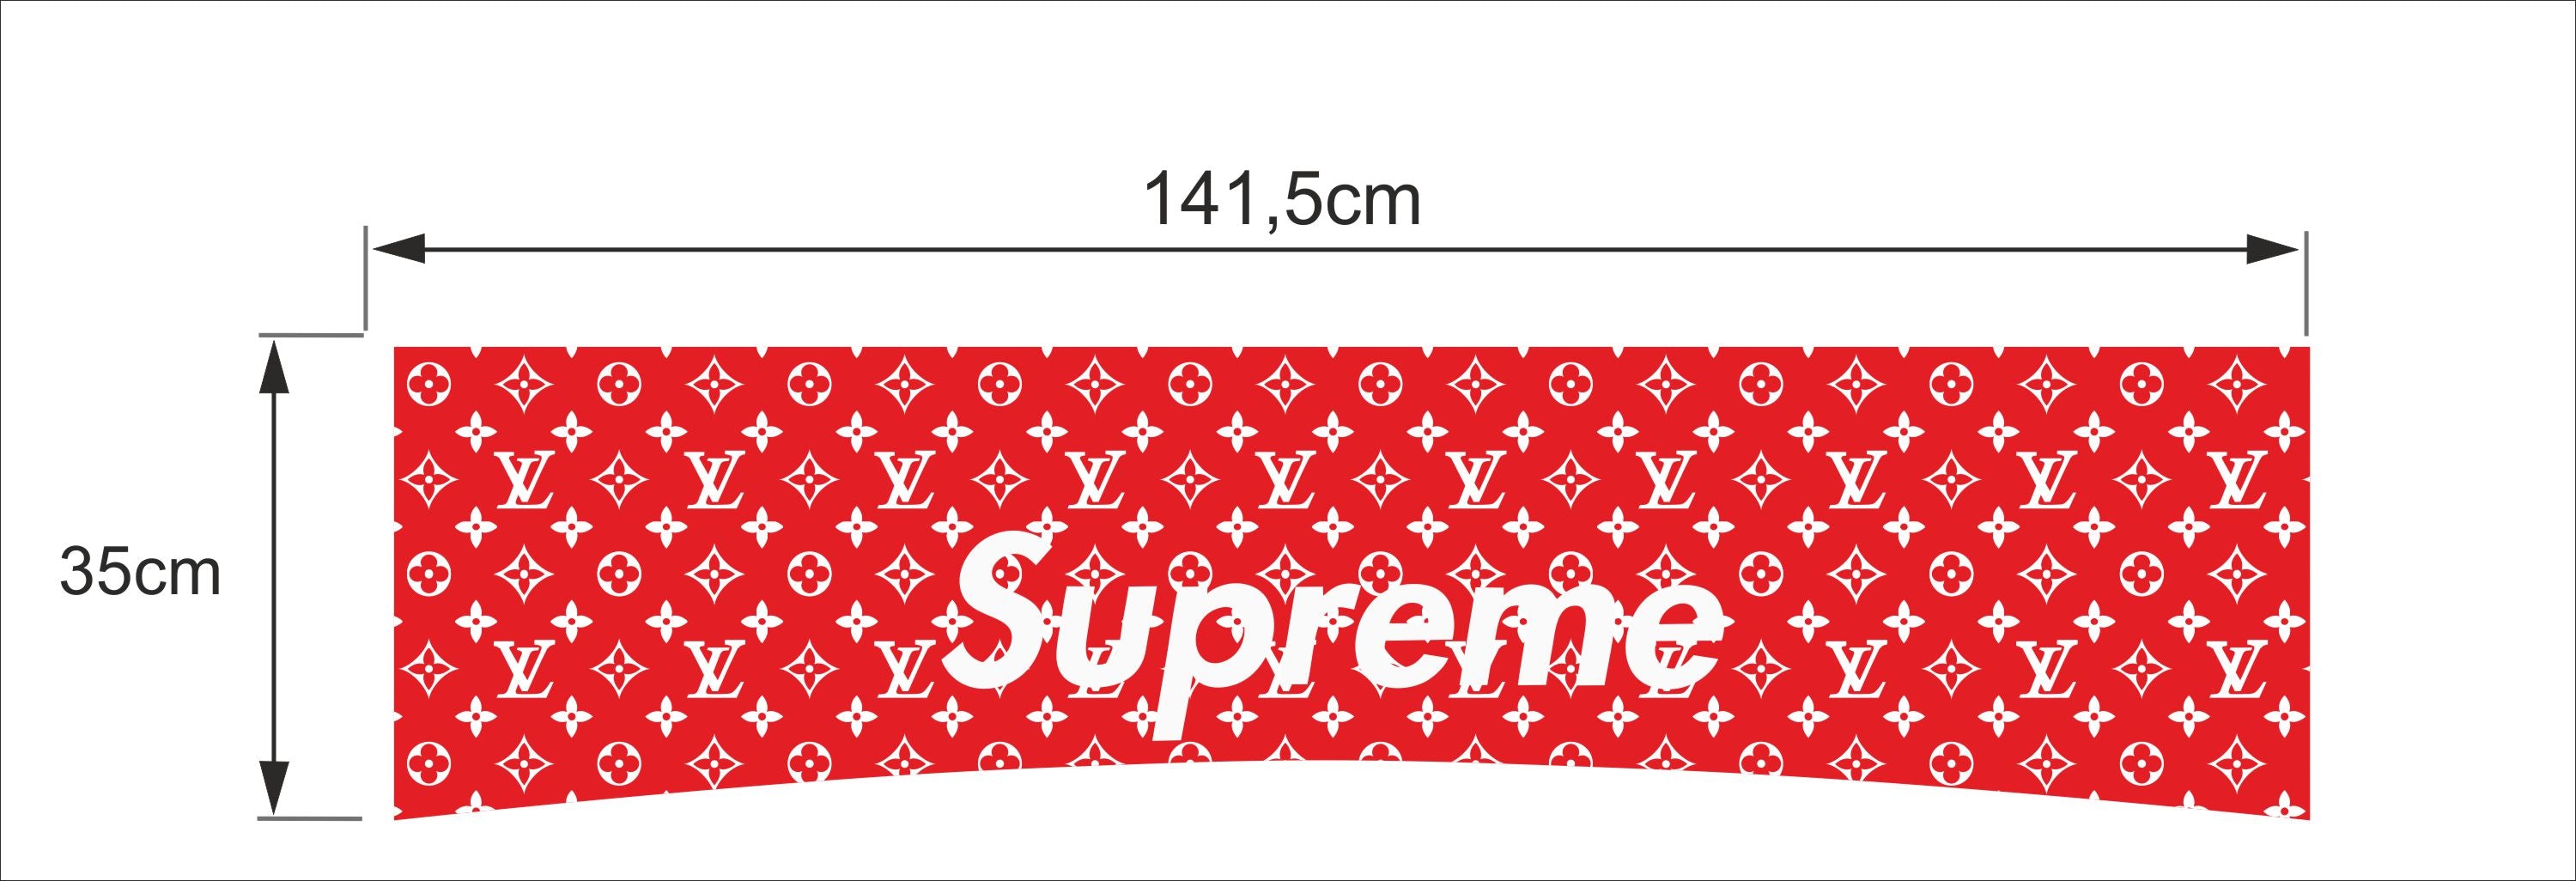 Make a louis vuitton pattern with your logo, and supreme banner by